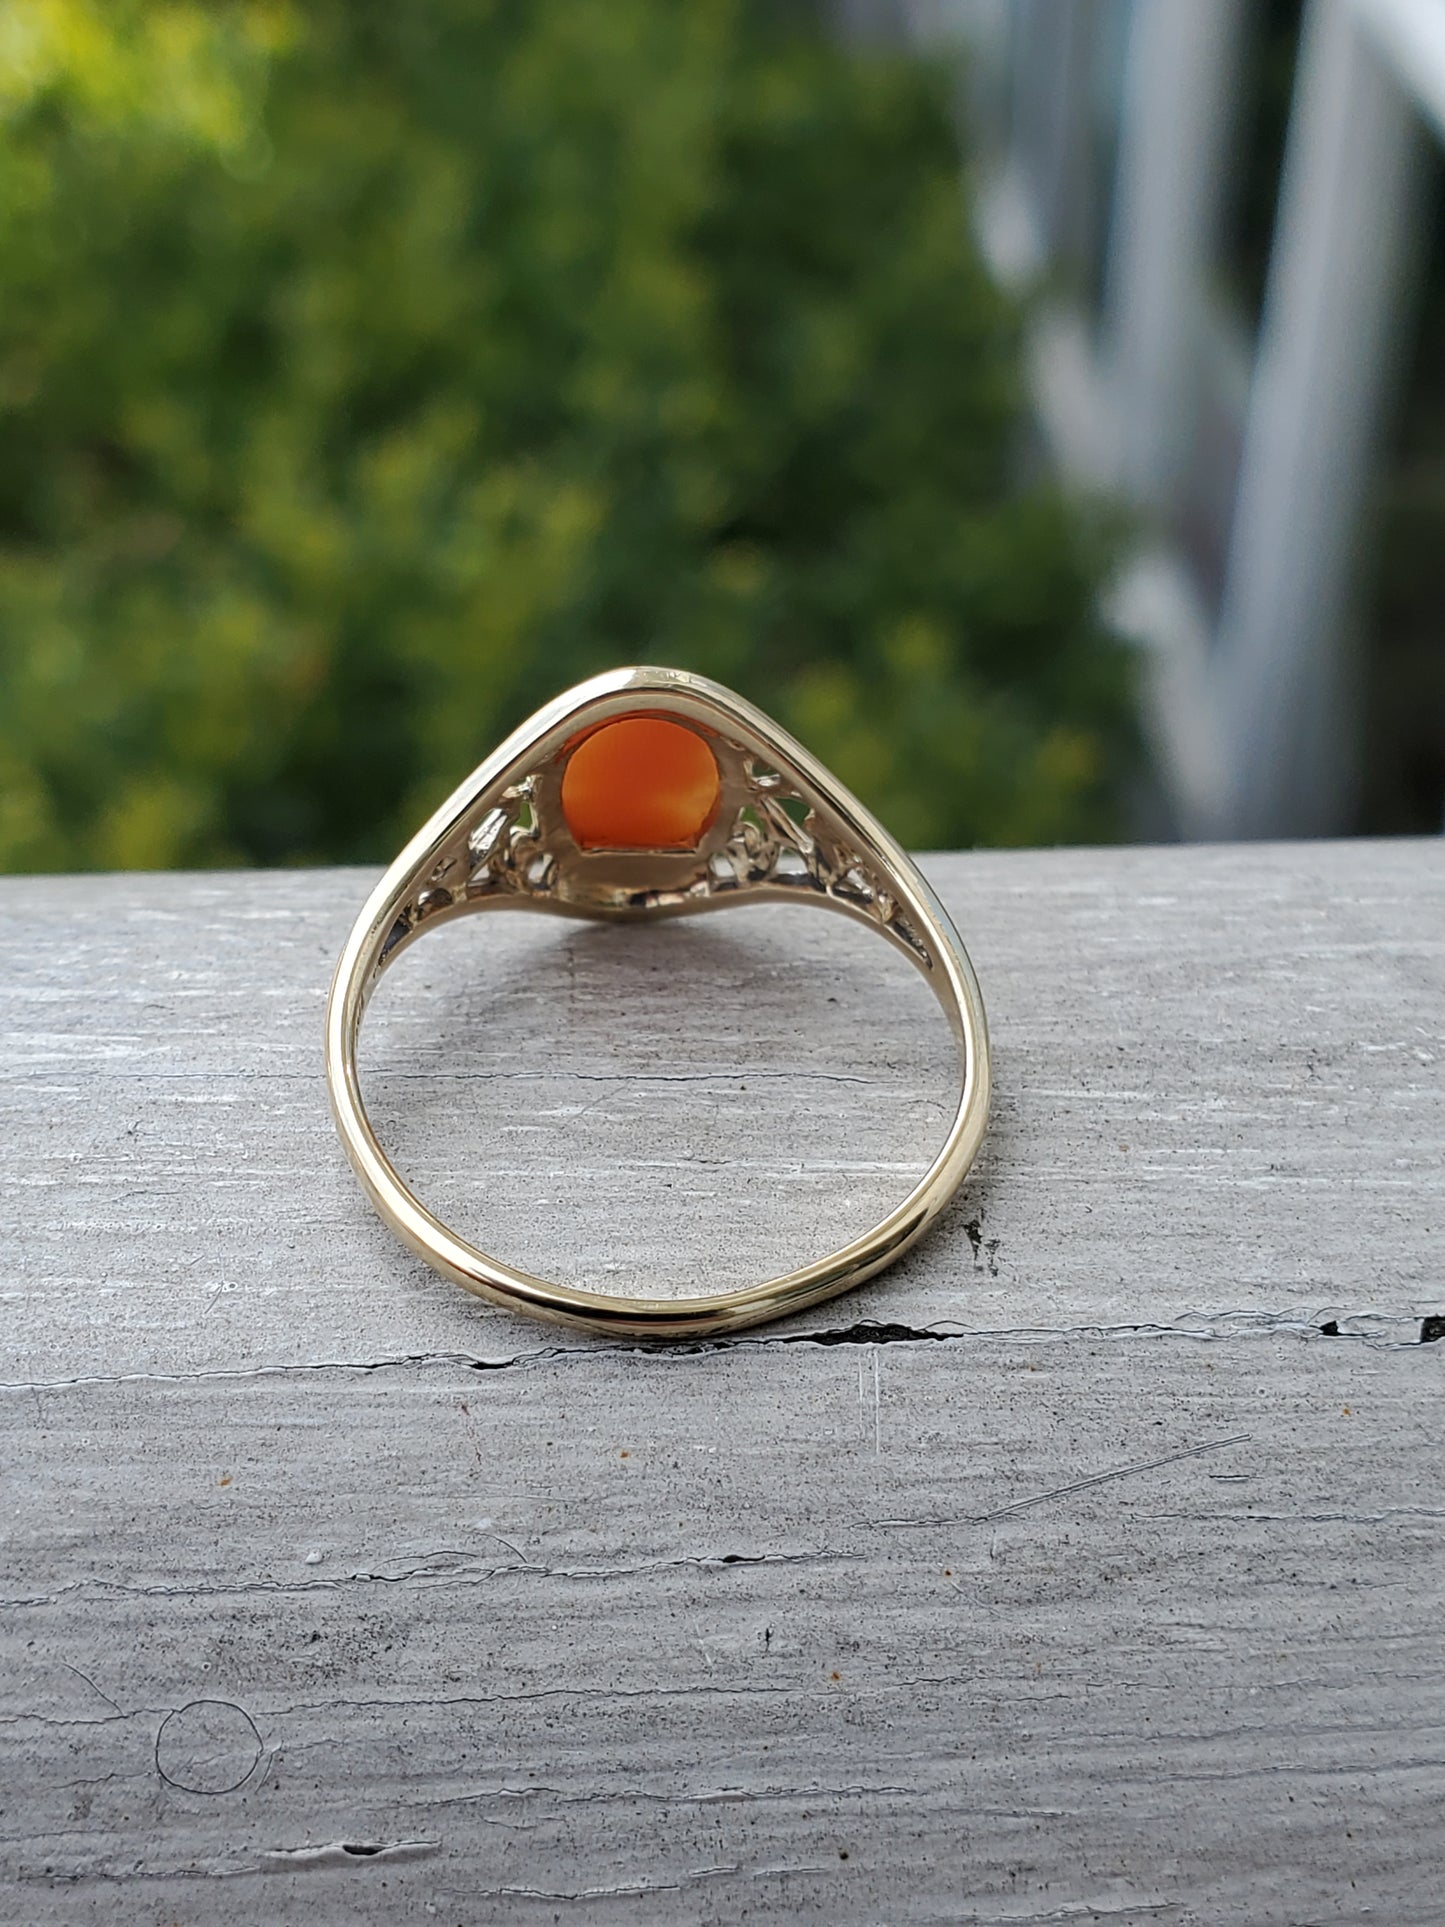 10k Yellow Gold Ladies Vintage 1950-1960 Cameo Oval Ring